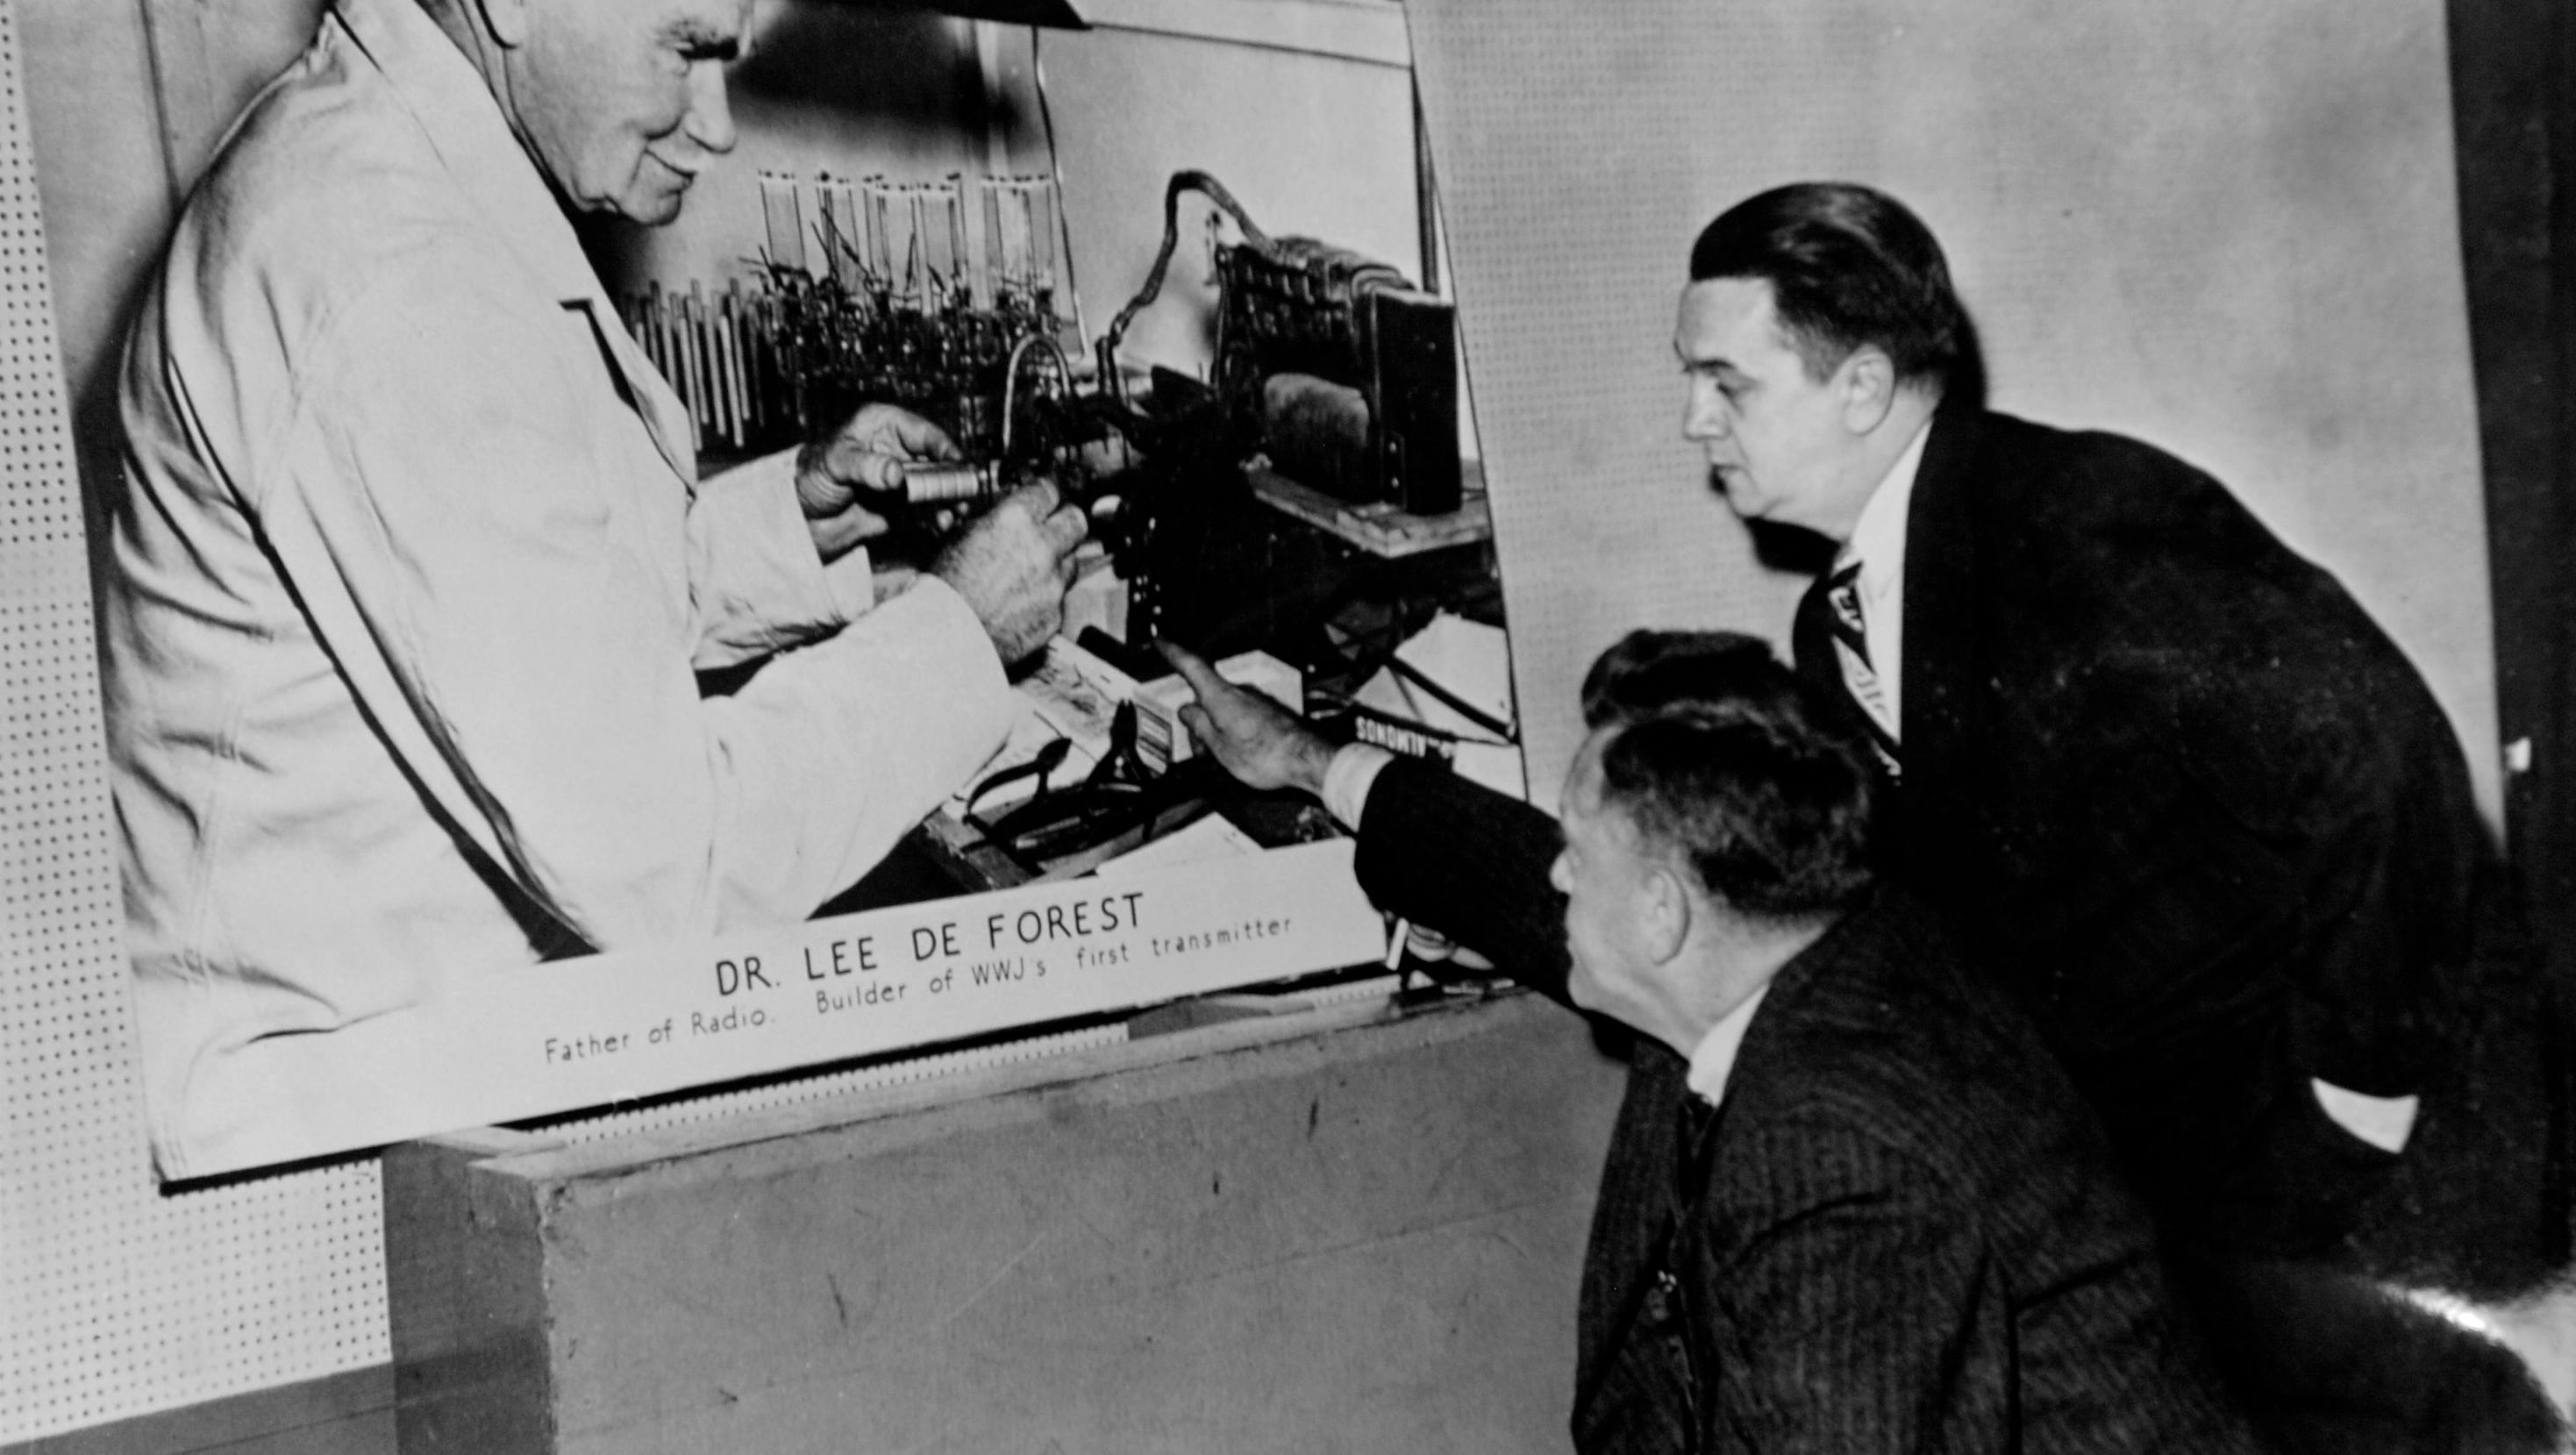 Dr. Lee de Forest, a pioneer in radio and motion picture sound technology, built the first transmitter for The Detroit News.